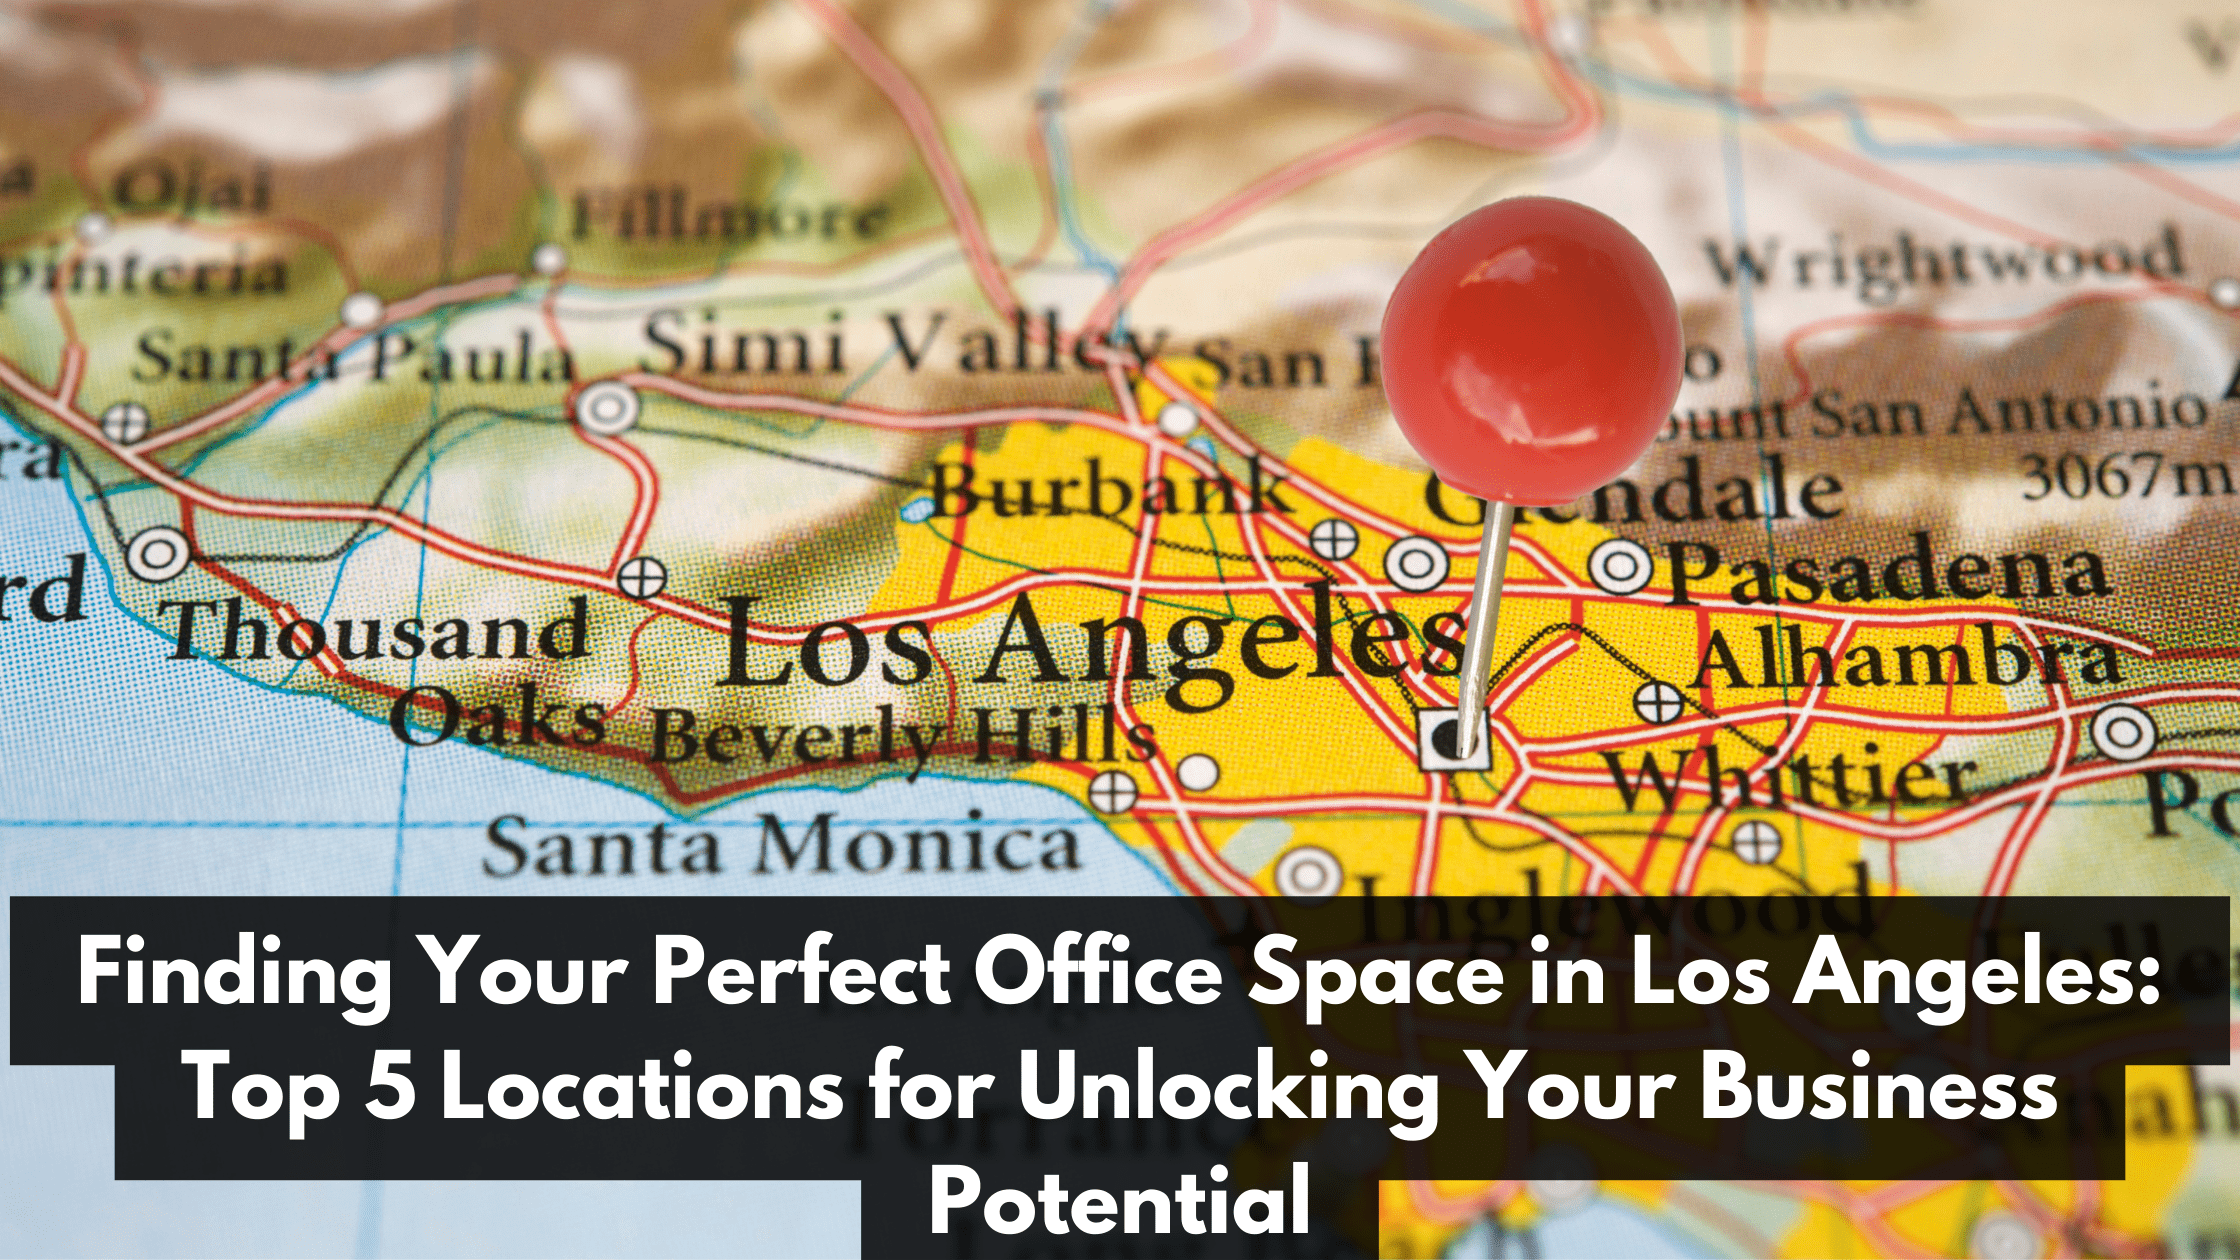 Finding Your Perfect Office Space in Los Angeles Top 5 Locations for Unlocking Your Business Potential 